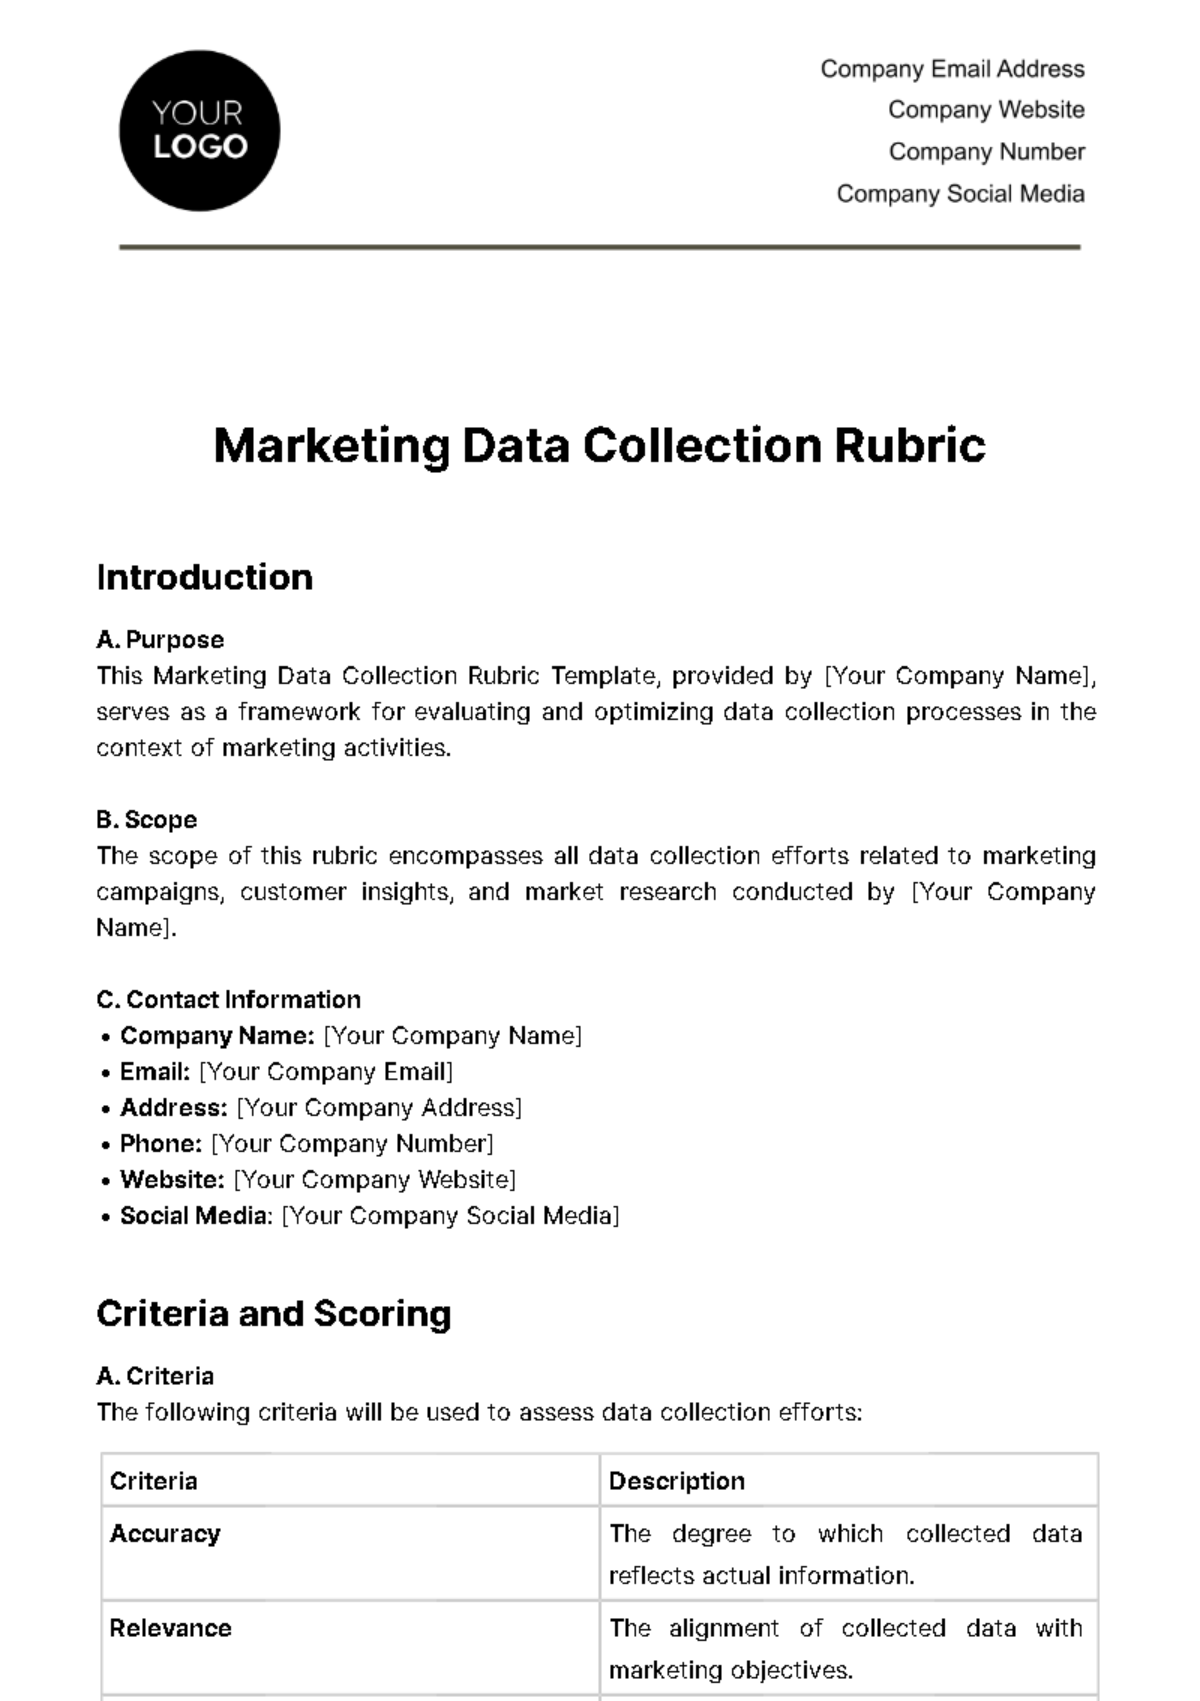 Free Marketing Data Collection Rubric Template